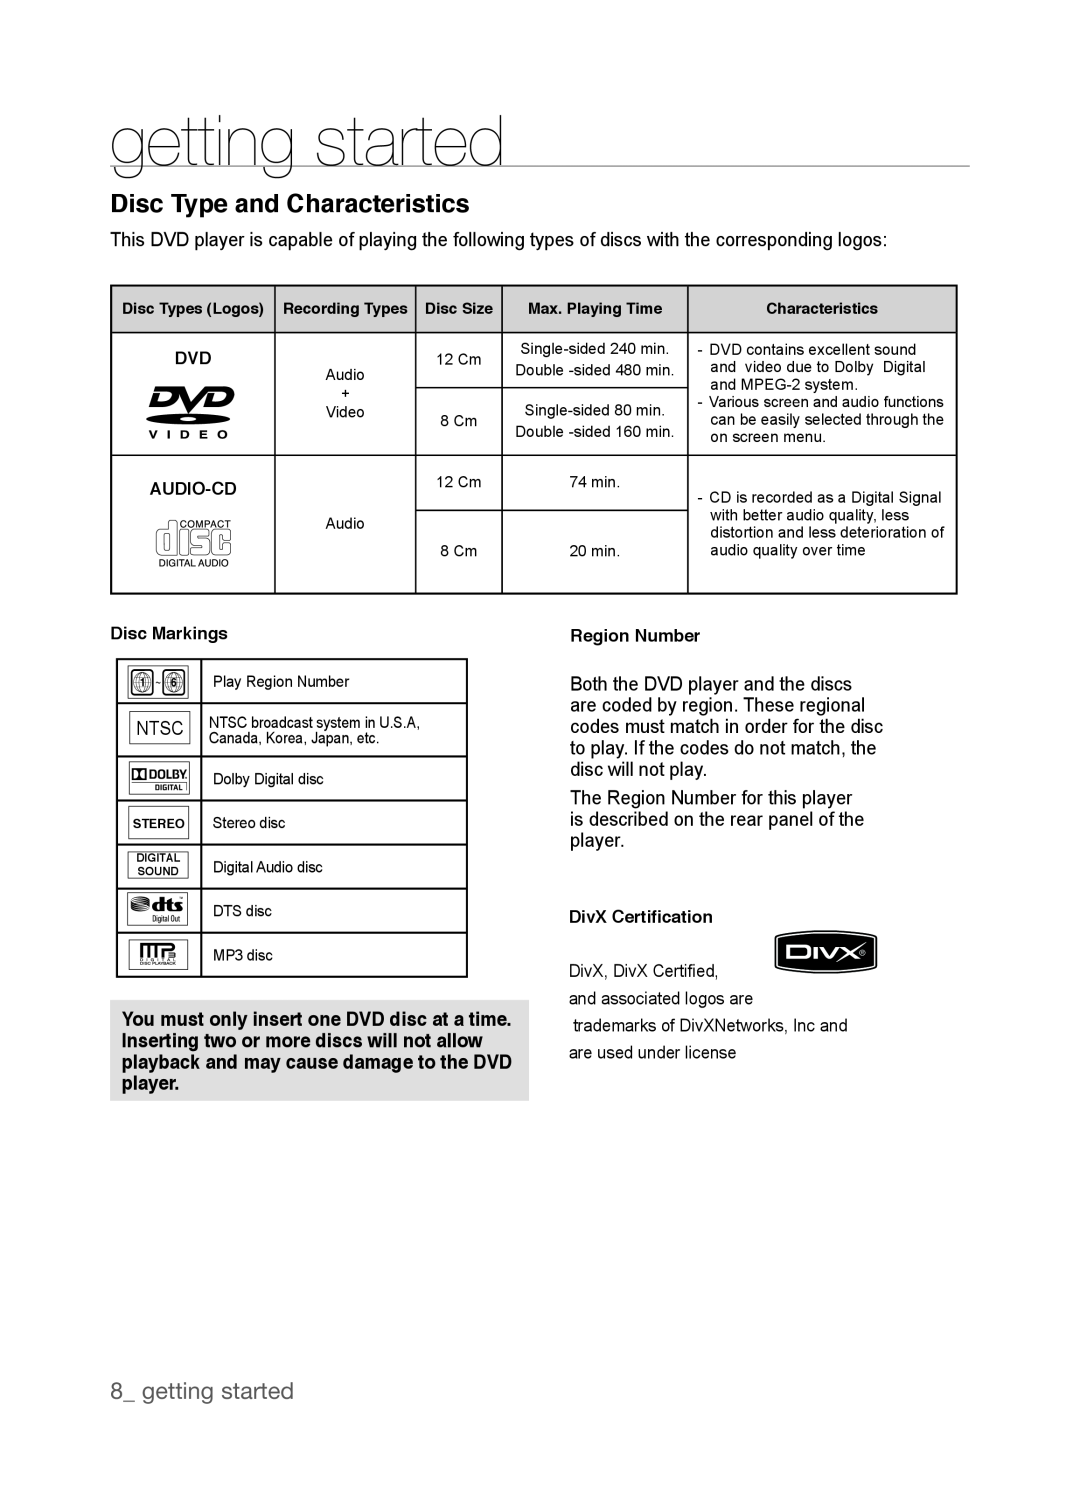 Samsung DVD-P390, AK68-01770G user manual Disc Type and Characteristics, getting started 